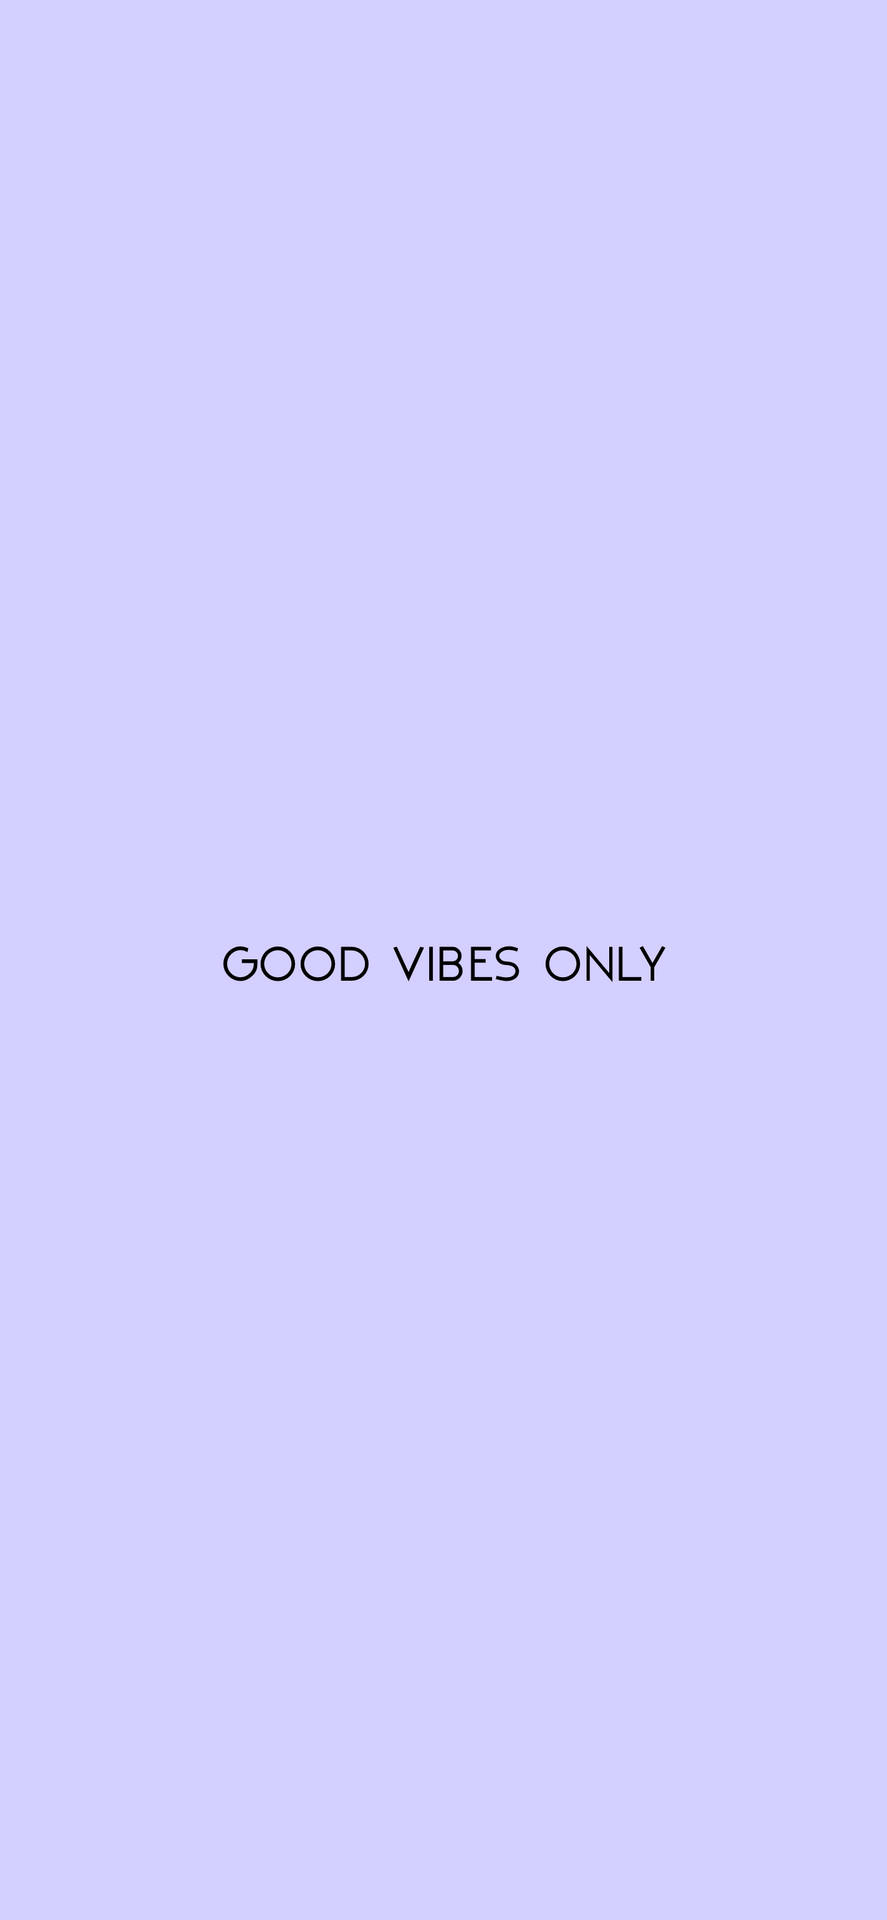 "Inspiring Good Vibes Only Sign on a Pastel Purple Wall" Wallpaper